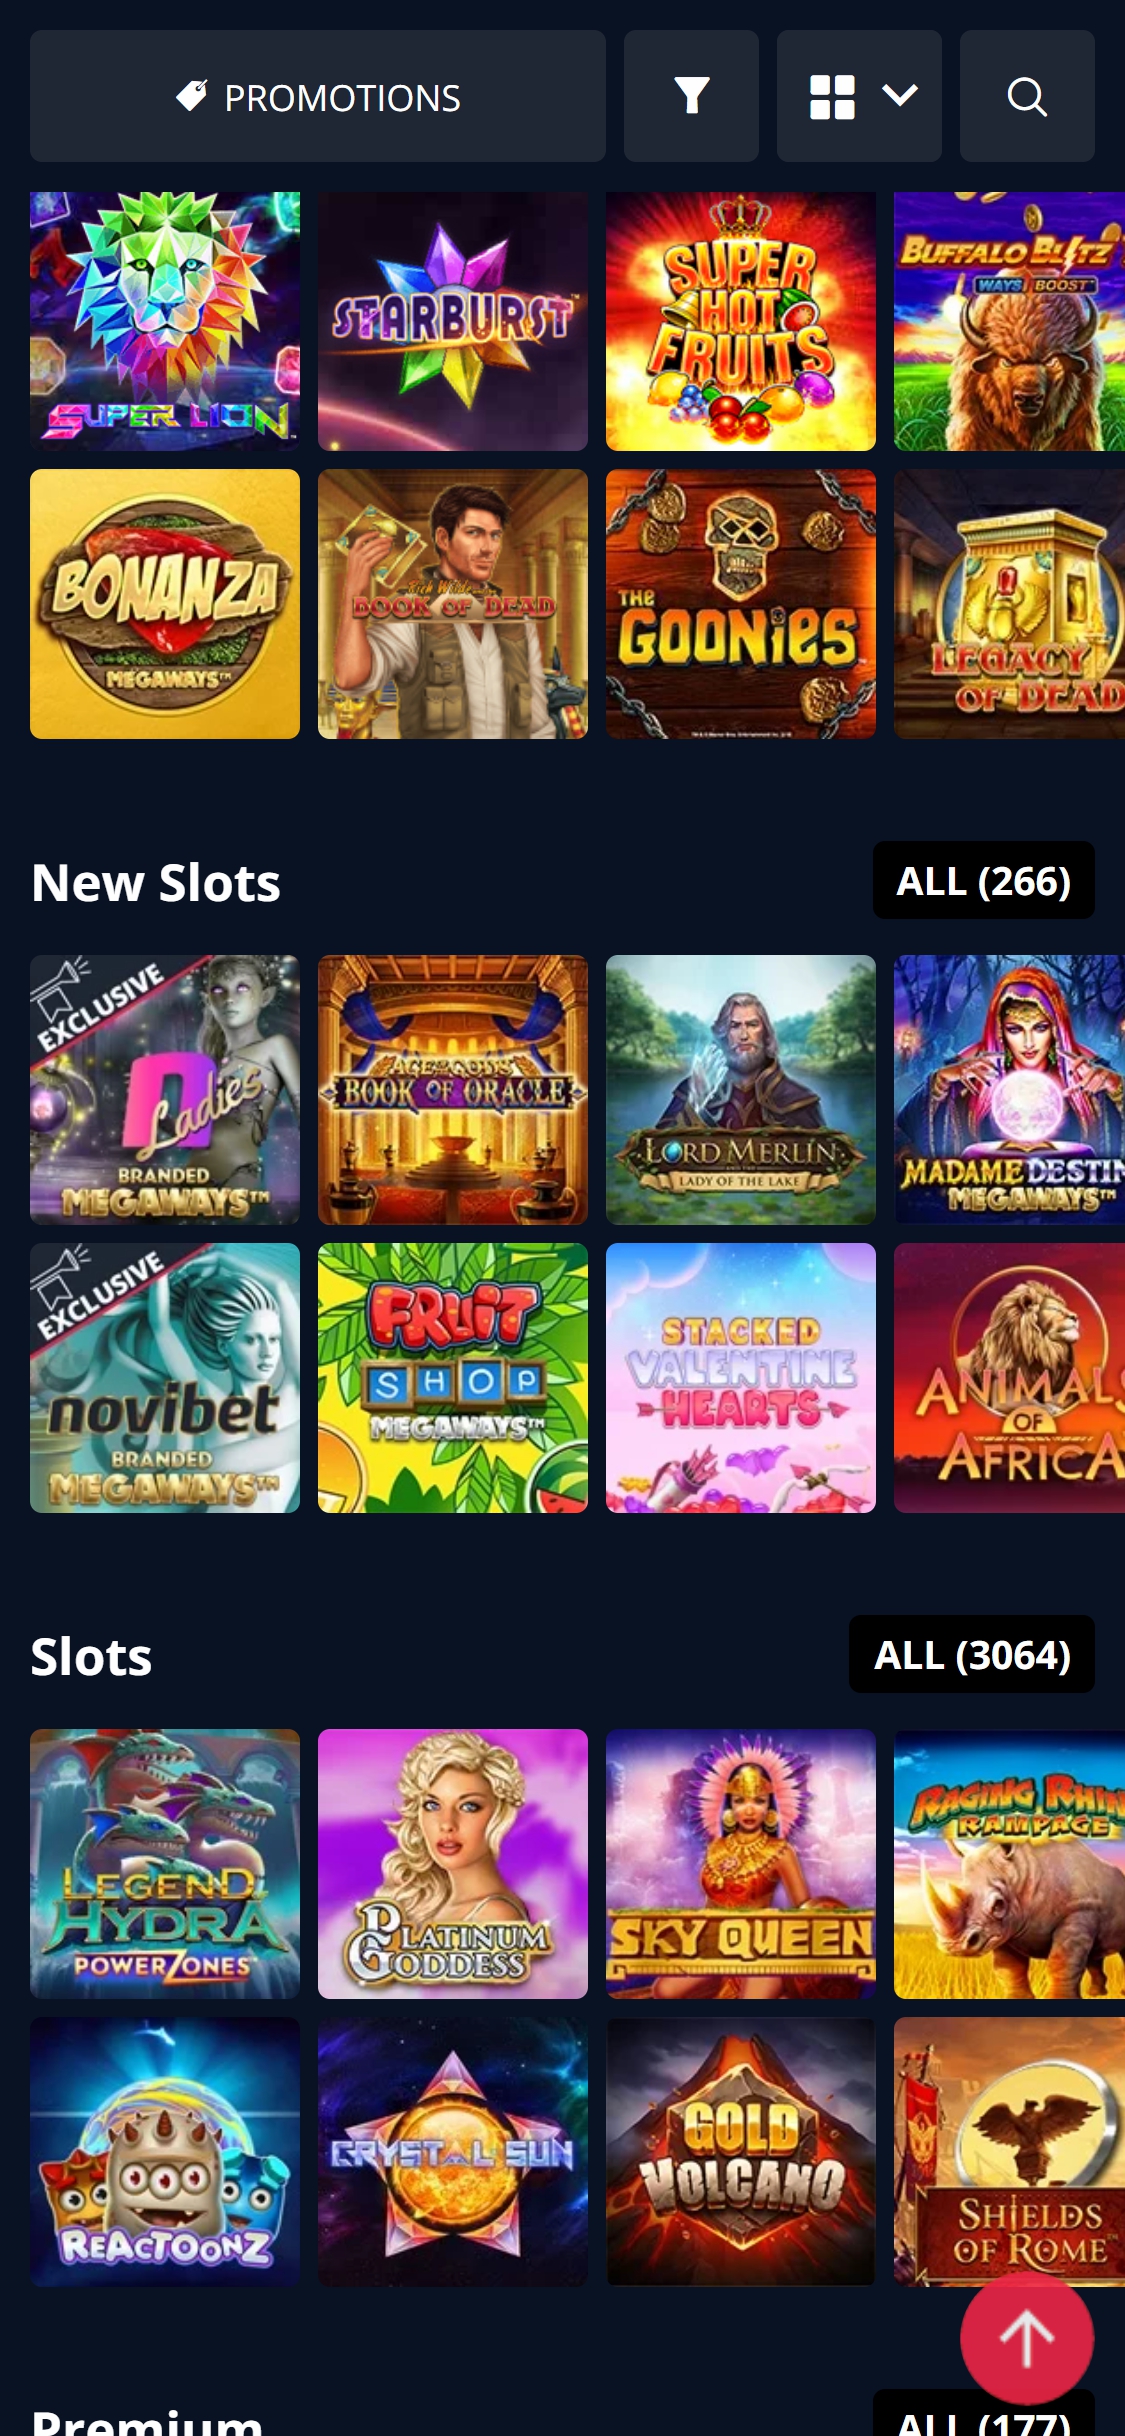 Open The Gates For online casino By Using These Simple Tips